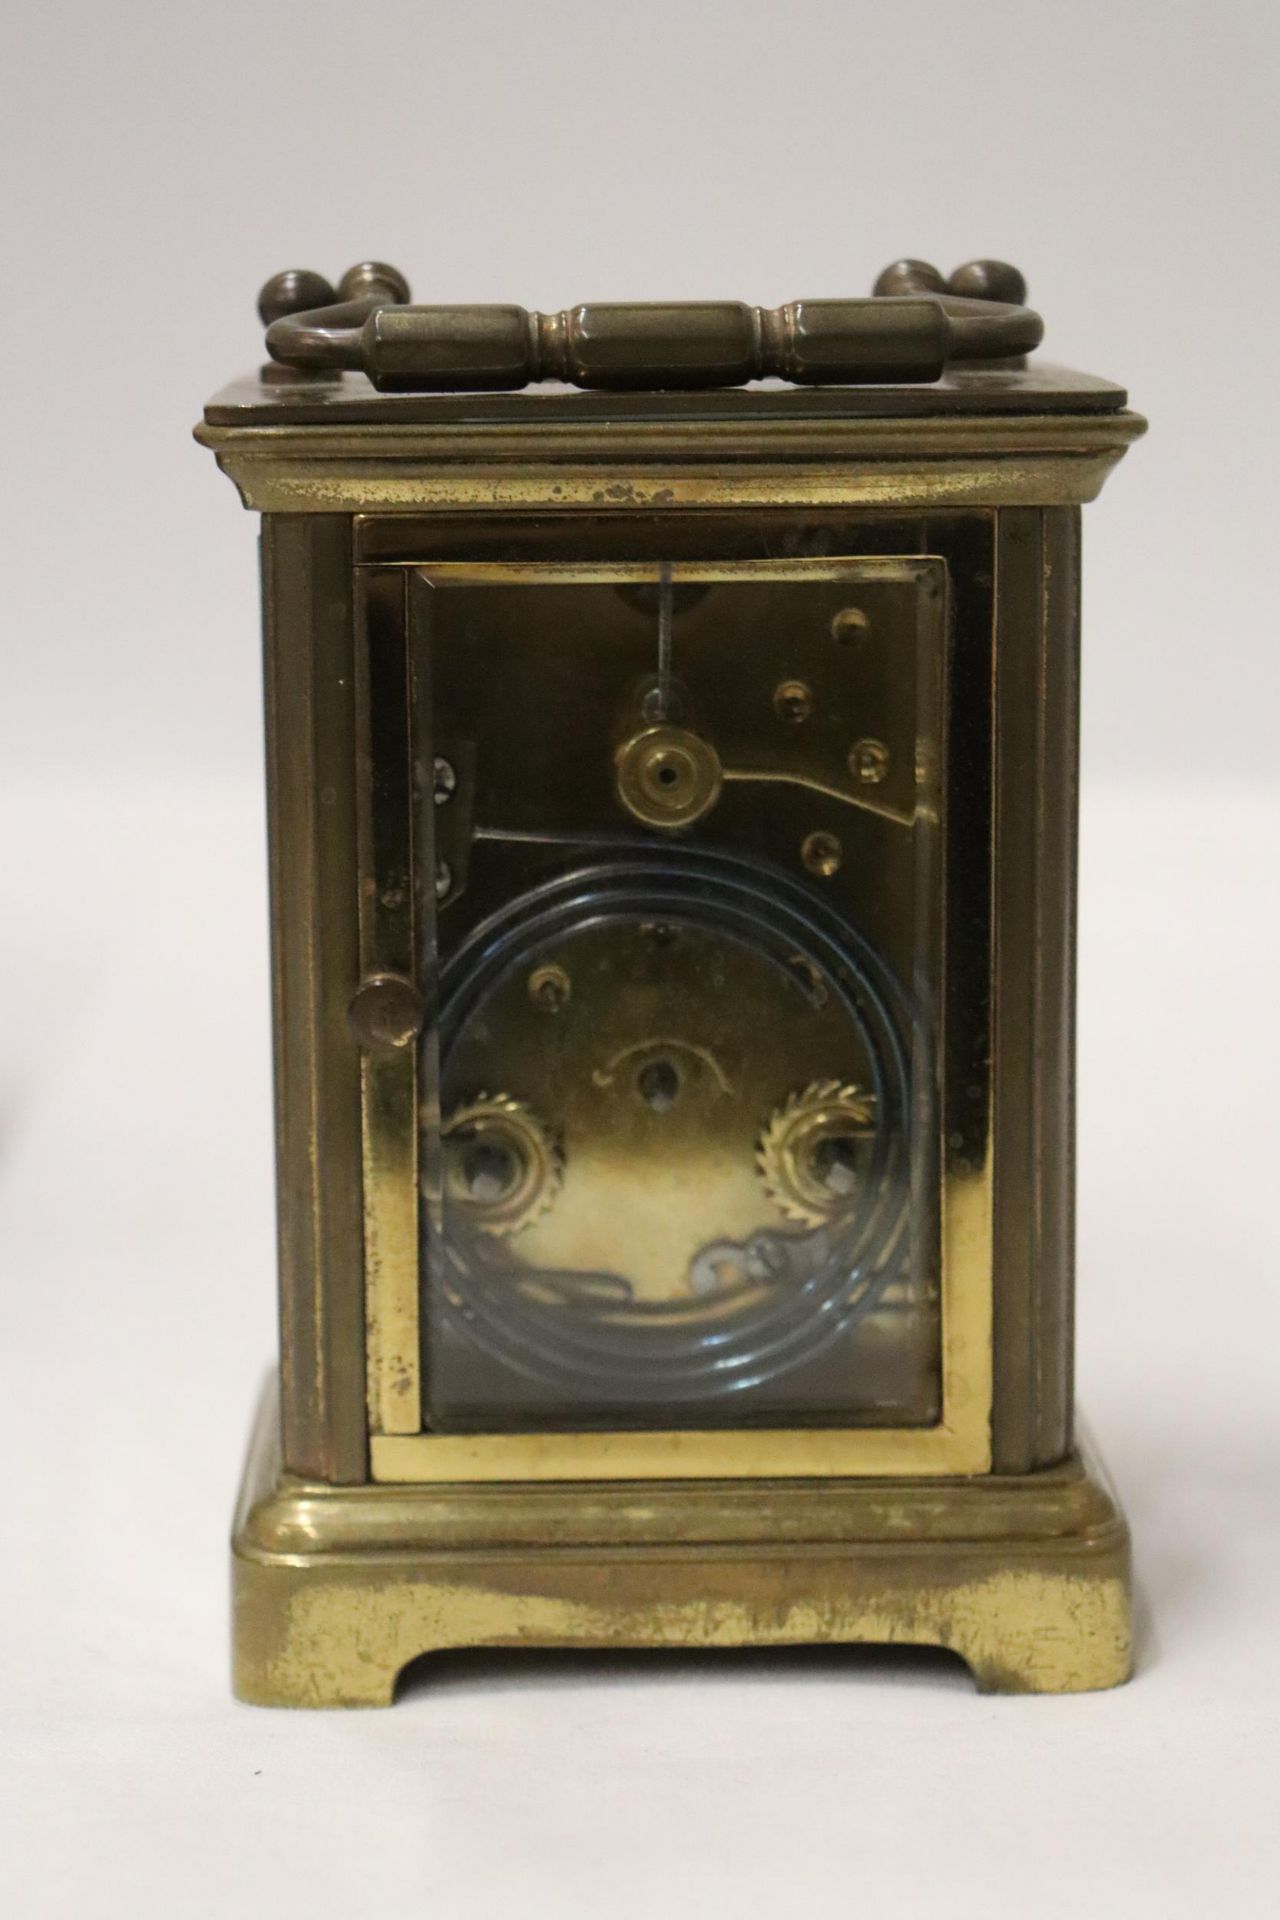 A VINTAGE BRASS ALARM CLOCK WITH GLASS SIDES TO SHOW INNER WORKINGS, IN A LEATHER CASE - Image 6 of 11